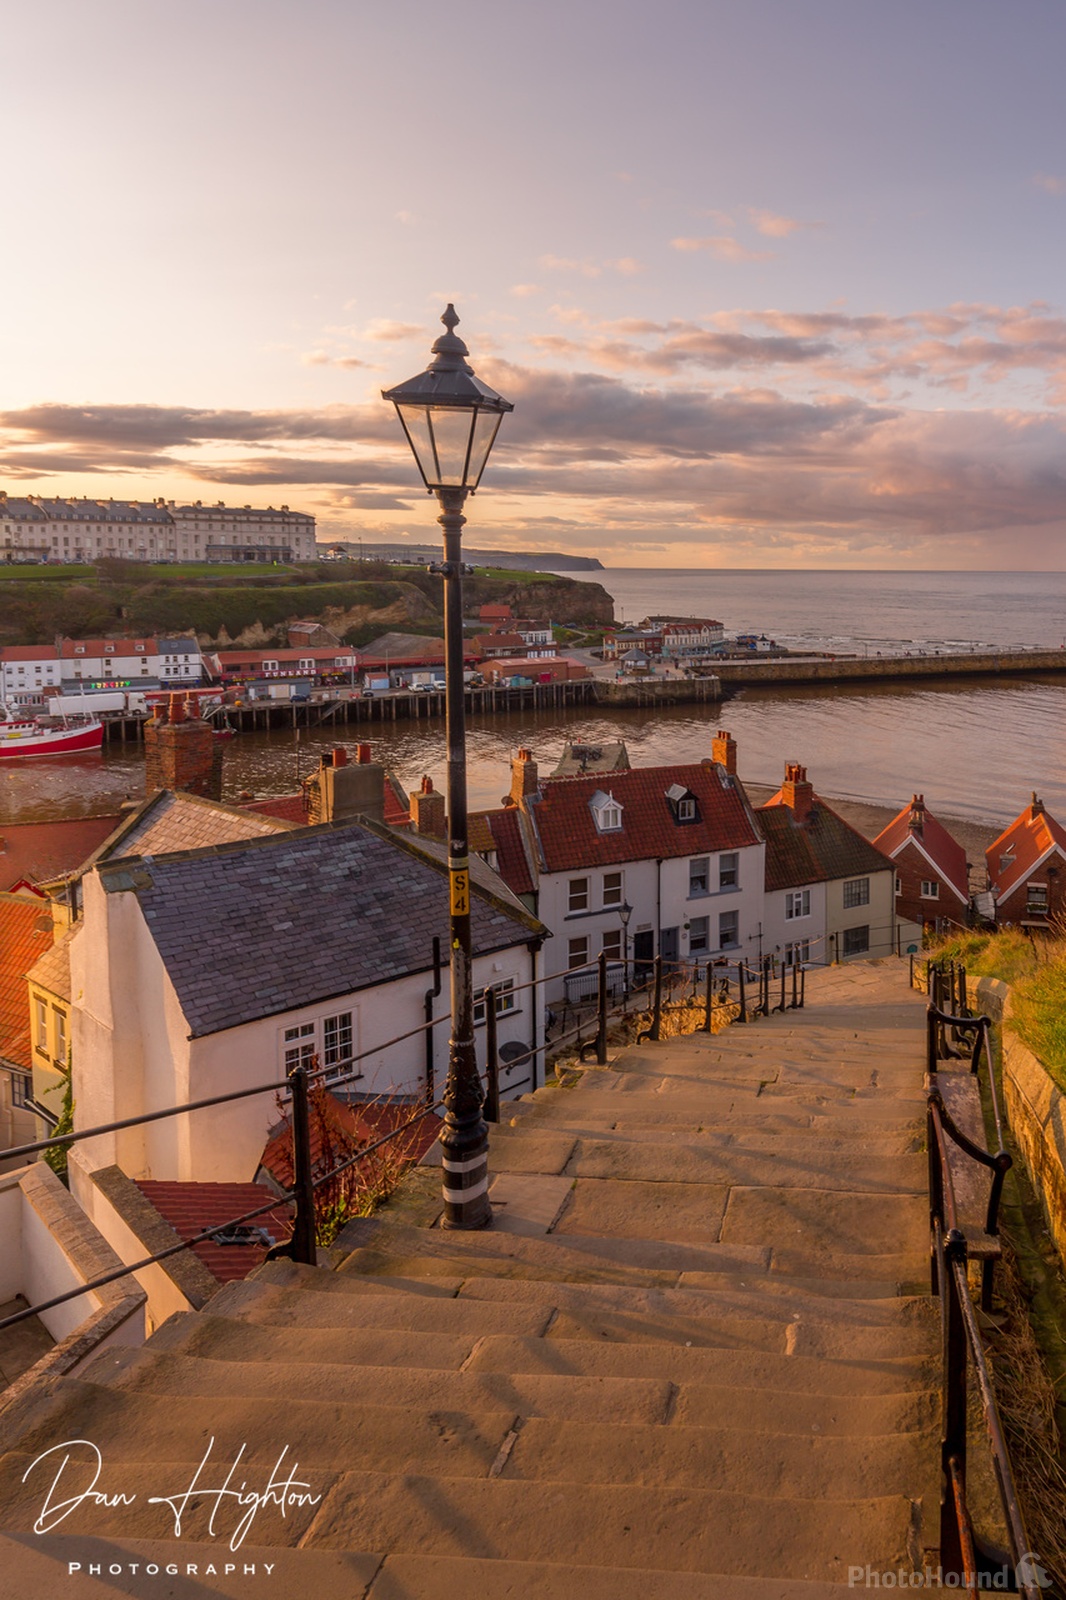 Image of Whitby 199 Steps by Dan Highton